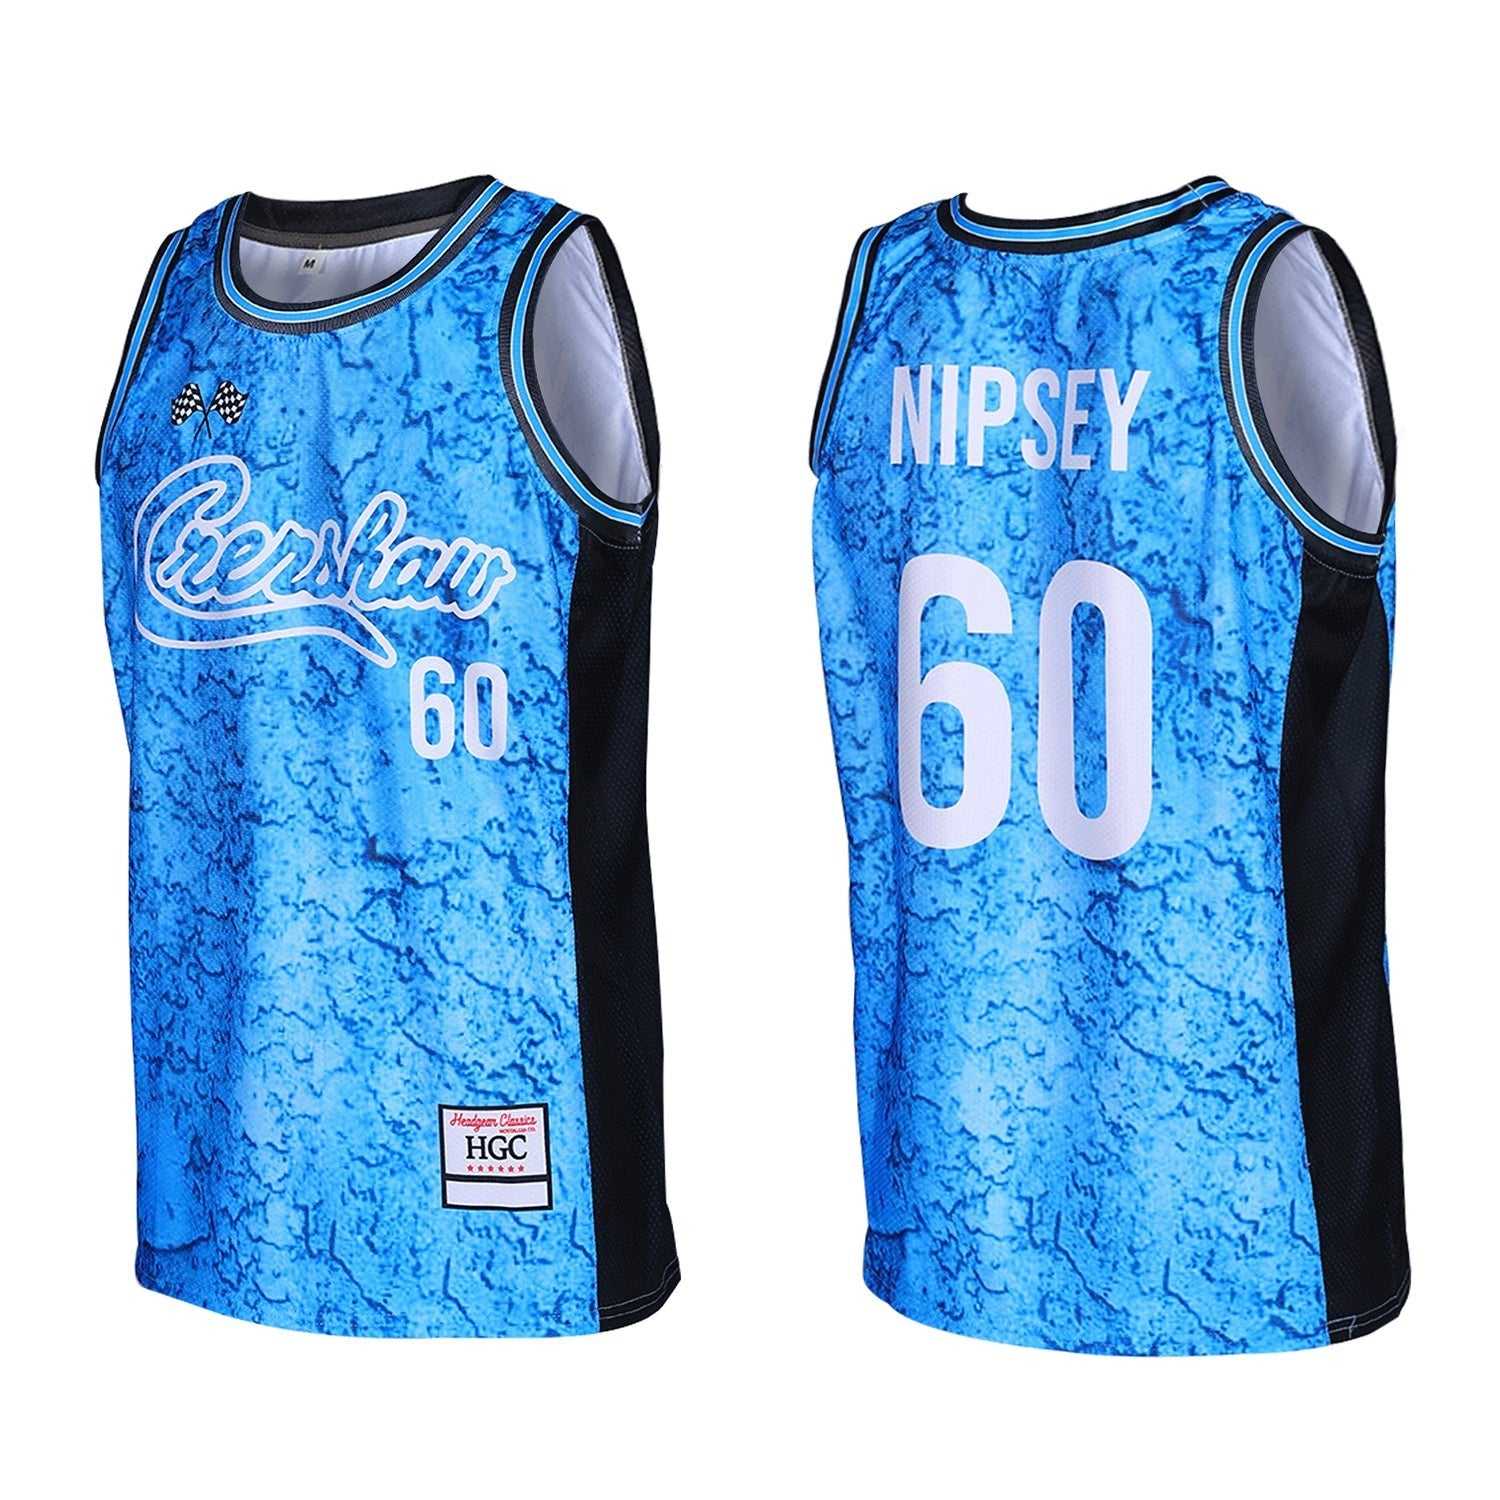 Kyrie Irving - Bed Stuy White Jersey-DaPrintFactory